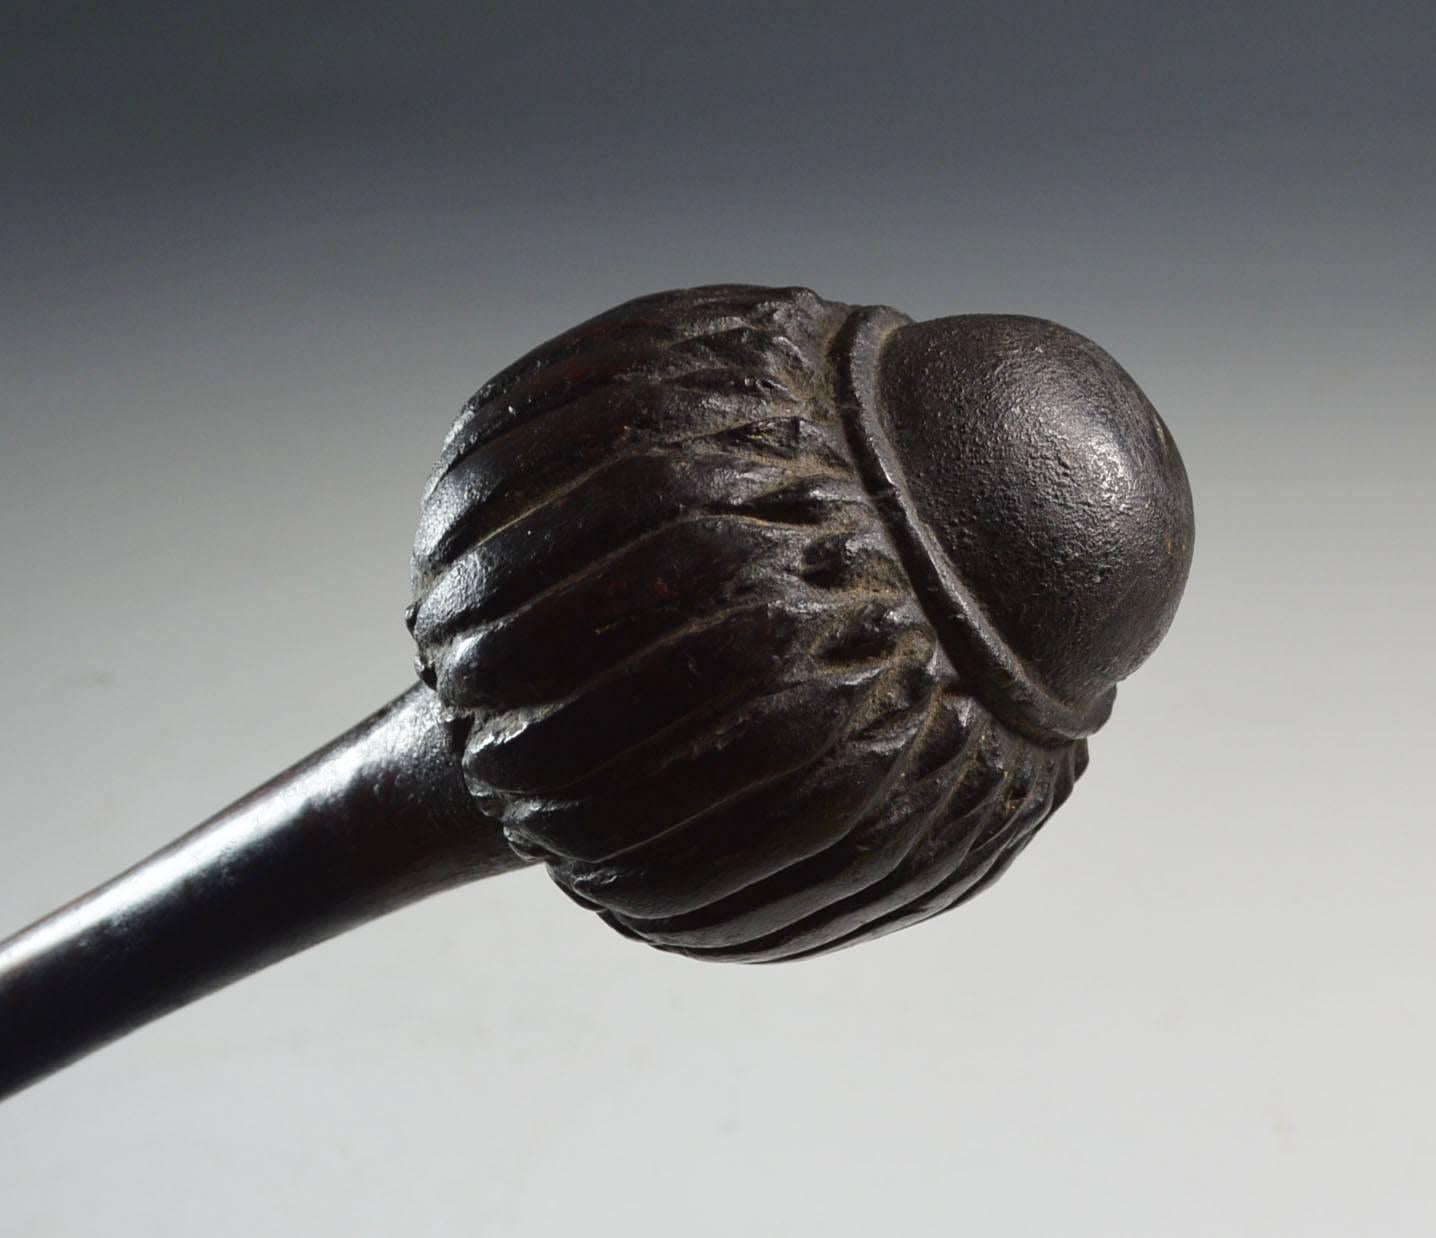 A fine quality 19th century Fiji antique Ula throwing club

Hand iron wood with carved Multi lobed head 

Deep  aged patina.

Excellent condition with no cracks,

Period: early 19th century,

Size: 42 cm comes with custom stand,

Provenance: UK